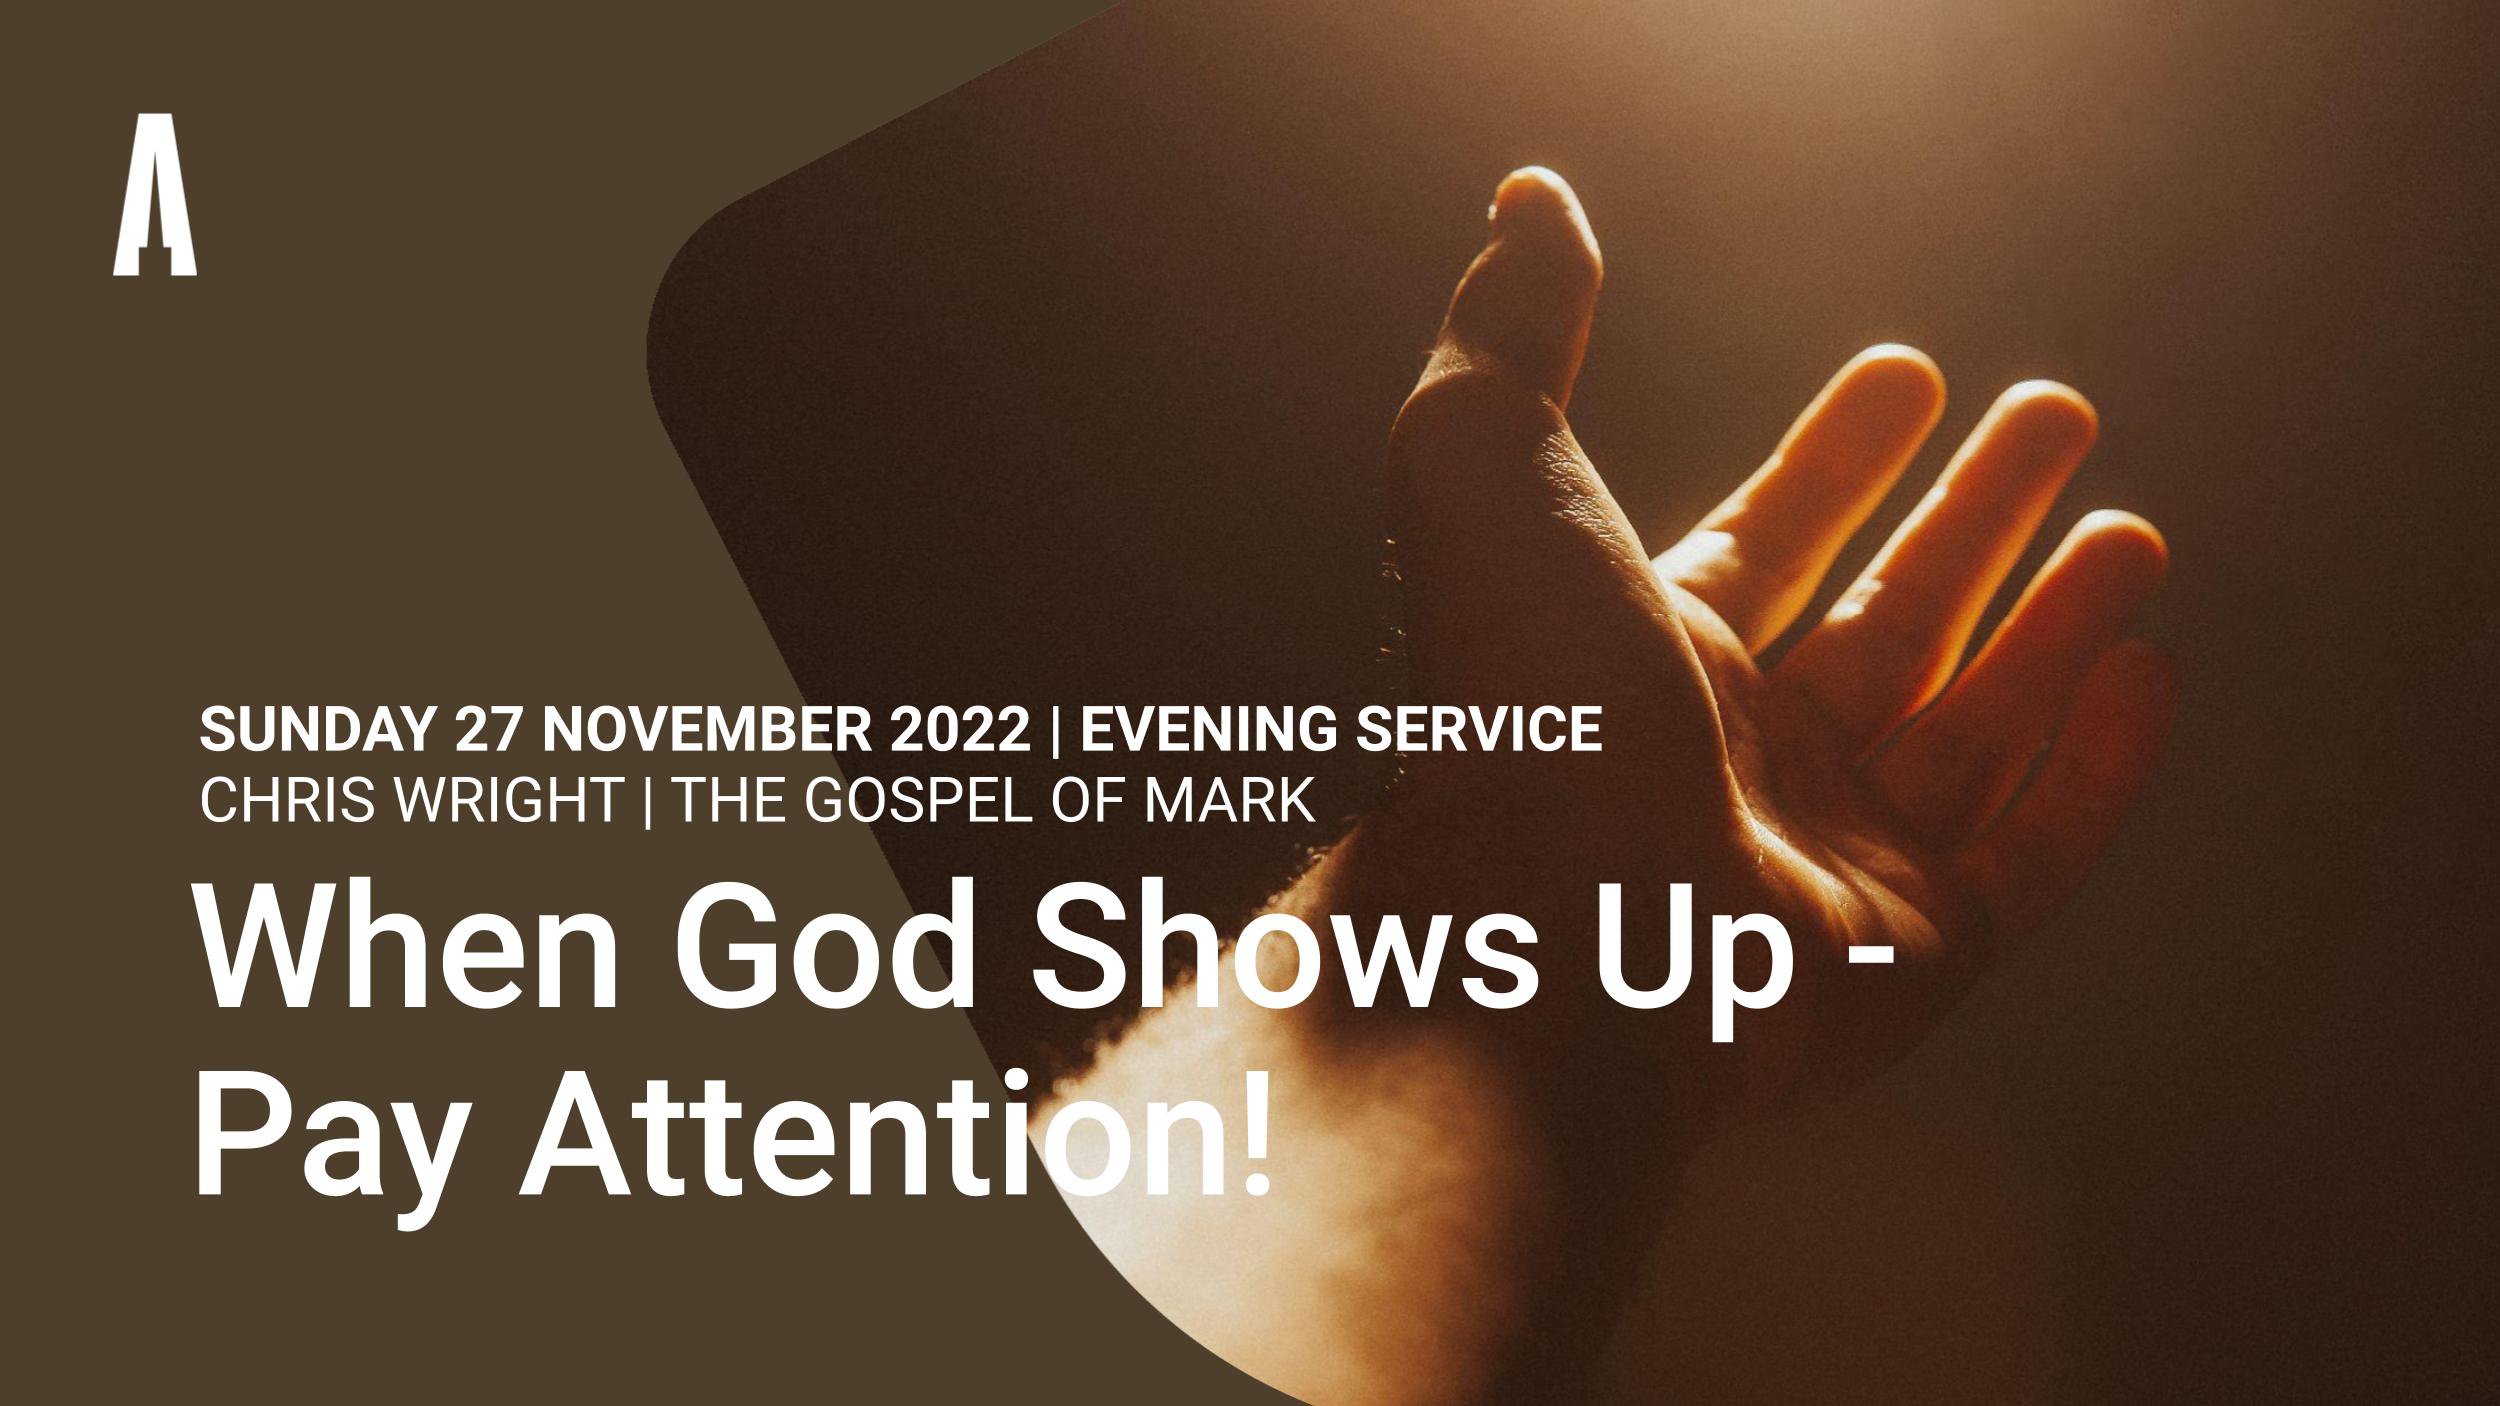 When God Shows Up - Pay Attention!